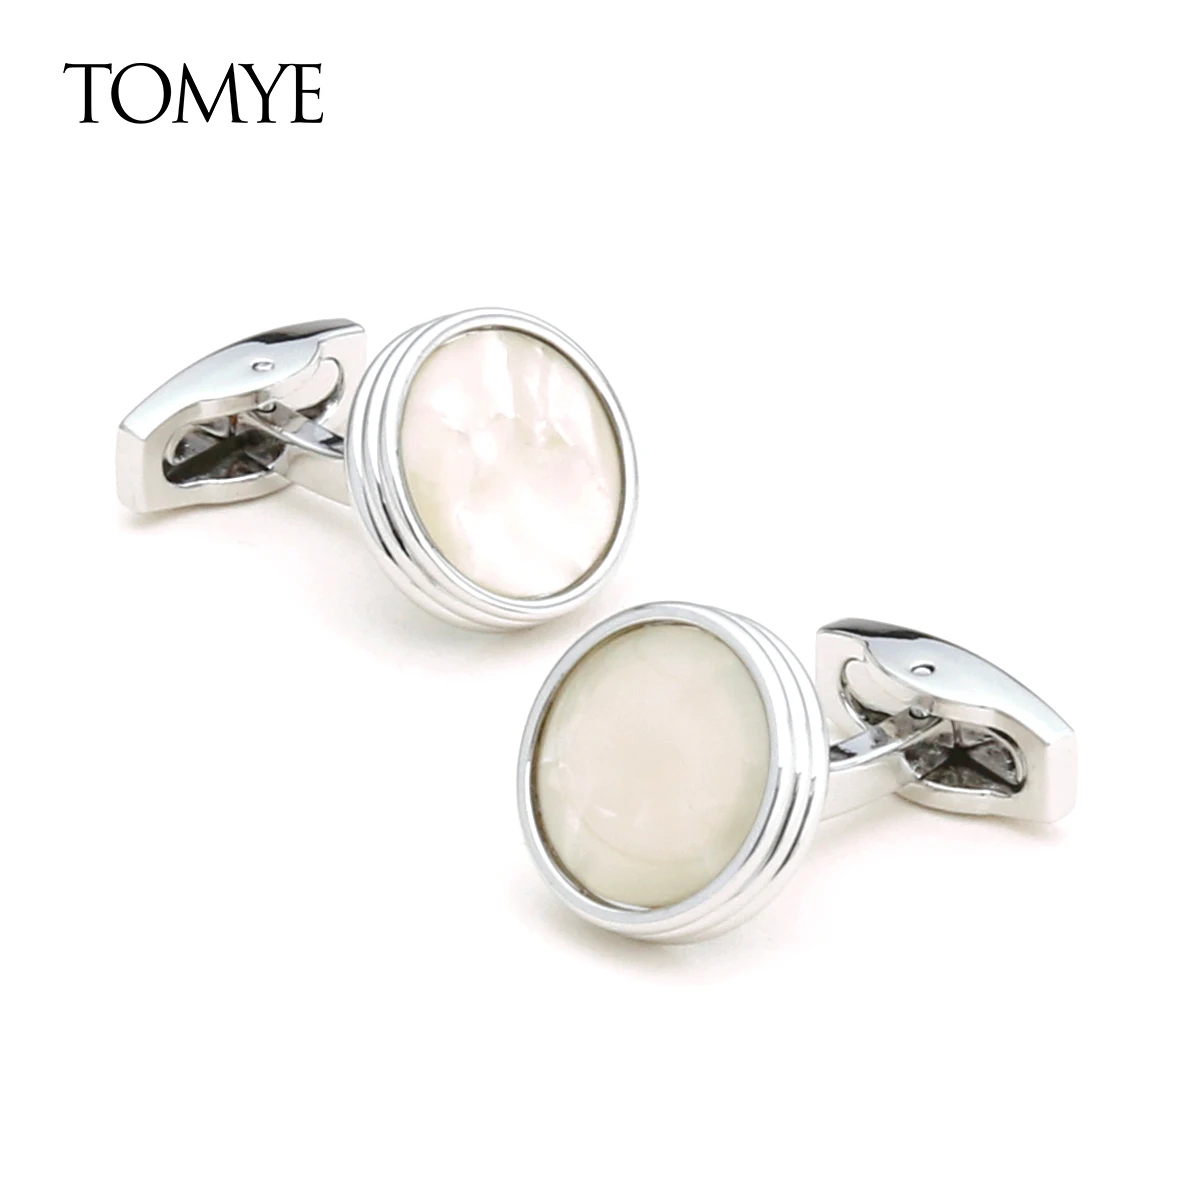 

Cufflinks for Men TOMYE XK21S011 High Quality Round Silver Custom Studs Buttons Casual Dress Shirt Cuff Links for Wedding Gifts